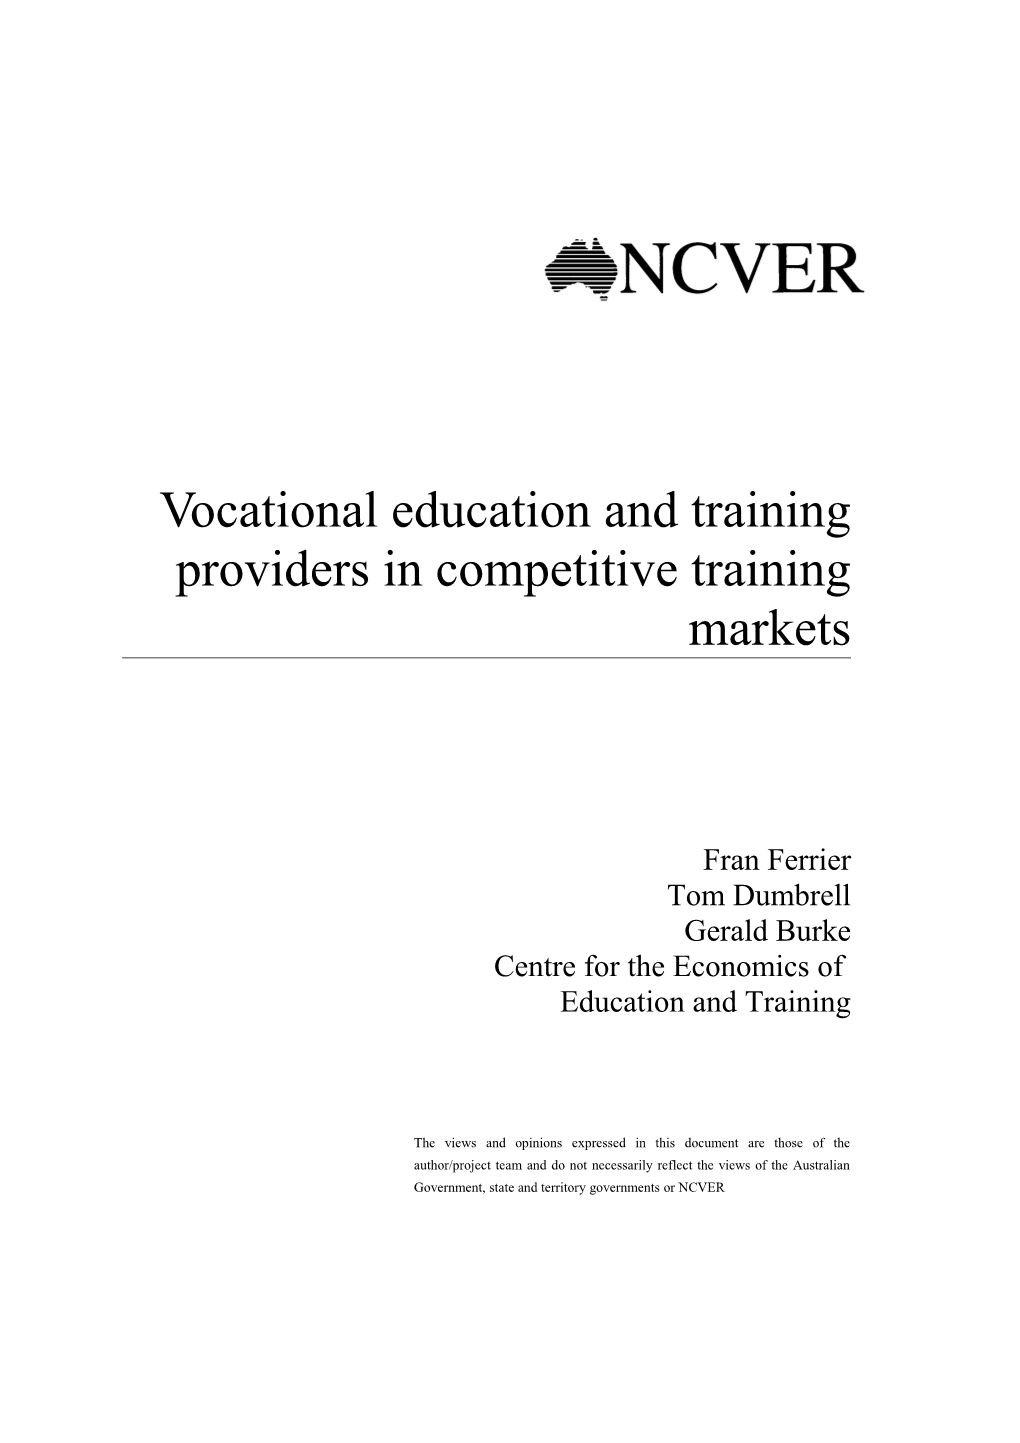 VET Providers in Competitive Training Markets